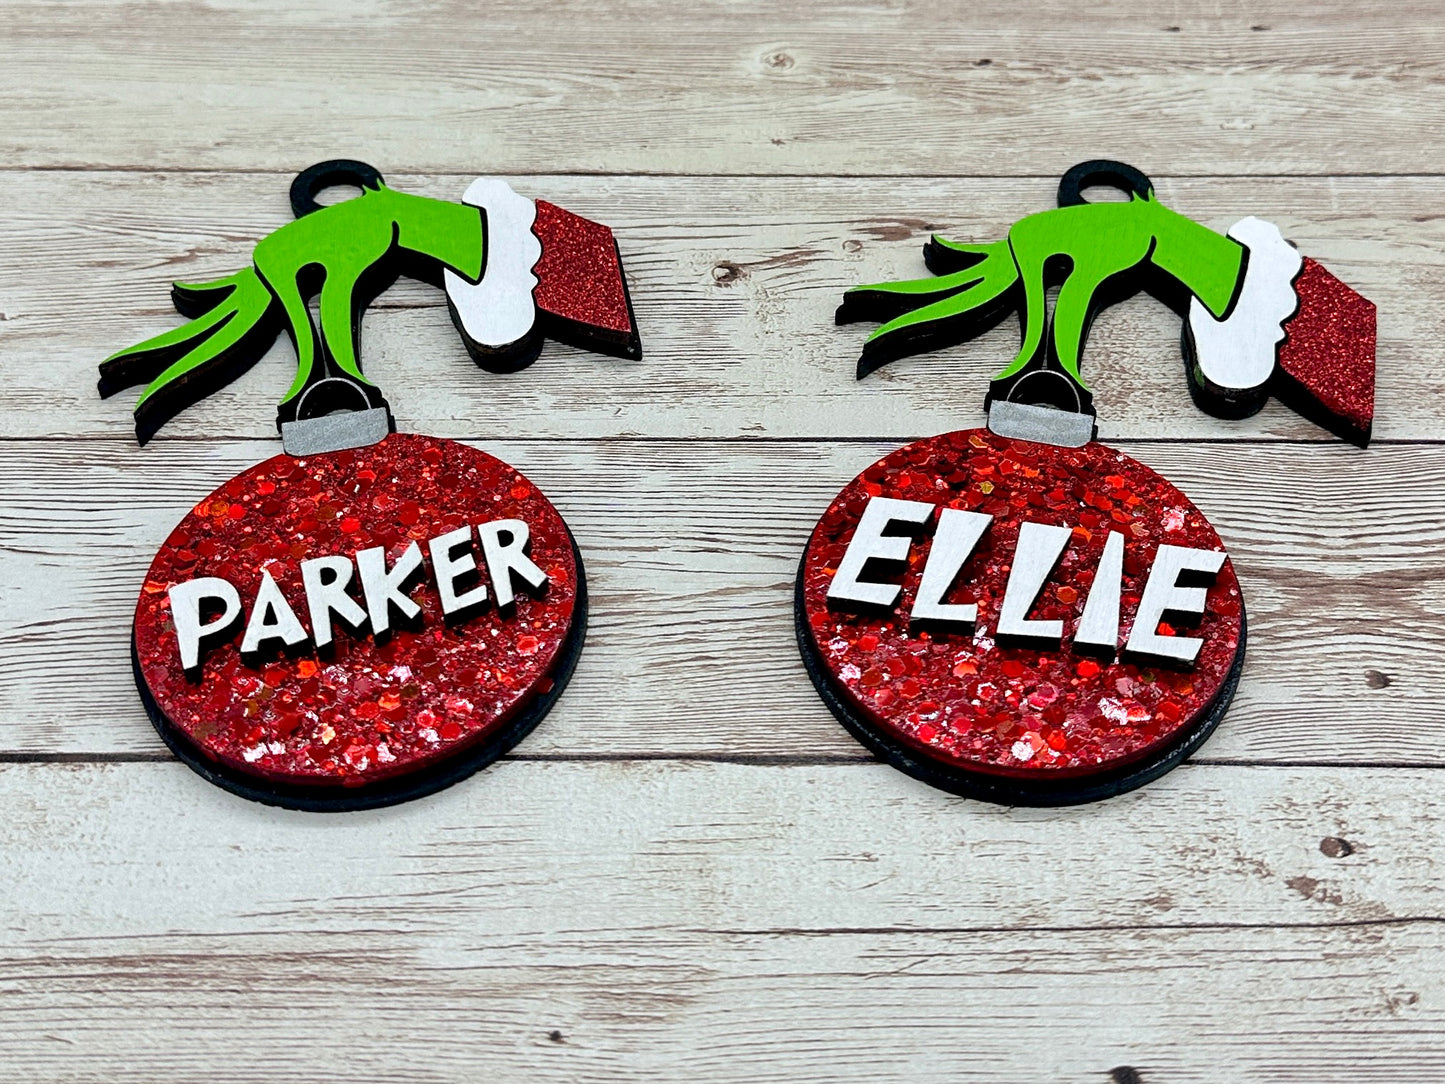 Green Monster Ornaments | Personalized Ornament | Wooden Christmas Ornament | Handmade Chirstmas Gift